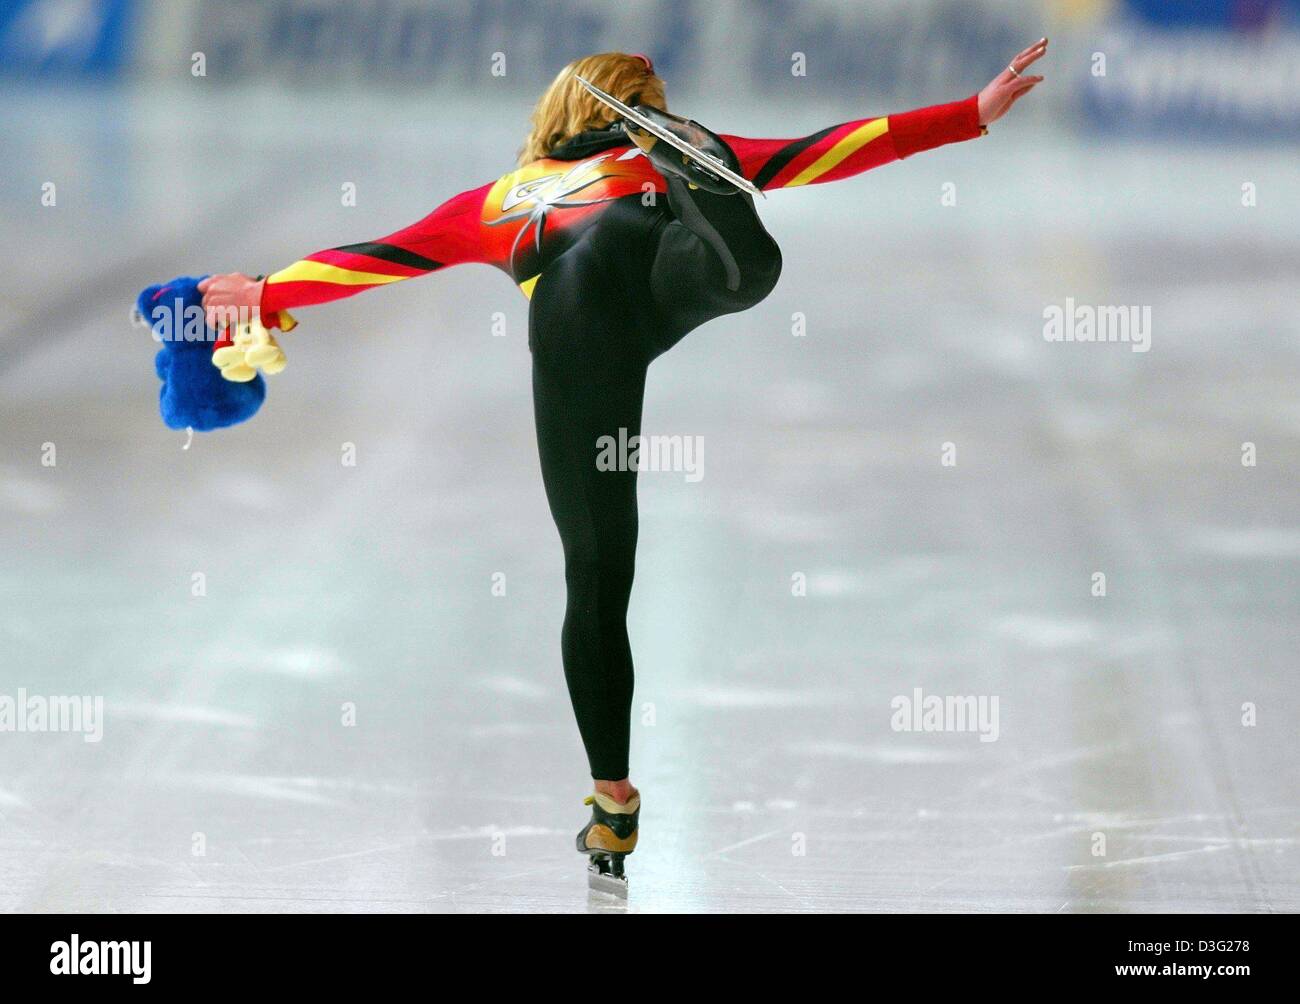 (dpa) - German speed skater Claudia Pechstein gracefully skates on one leg as she jubilates after crossing the finish line of the women's 3000m race at the speedskating single distances world championships in Berlin, 15 March 2003. She wins second place clocking 4:07.99 minutes. Stock Photo